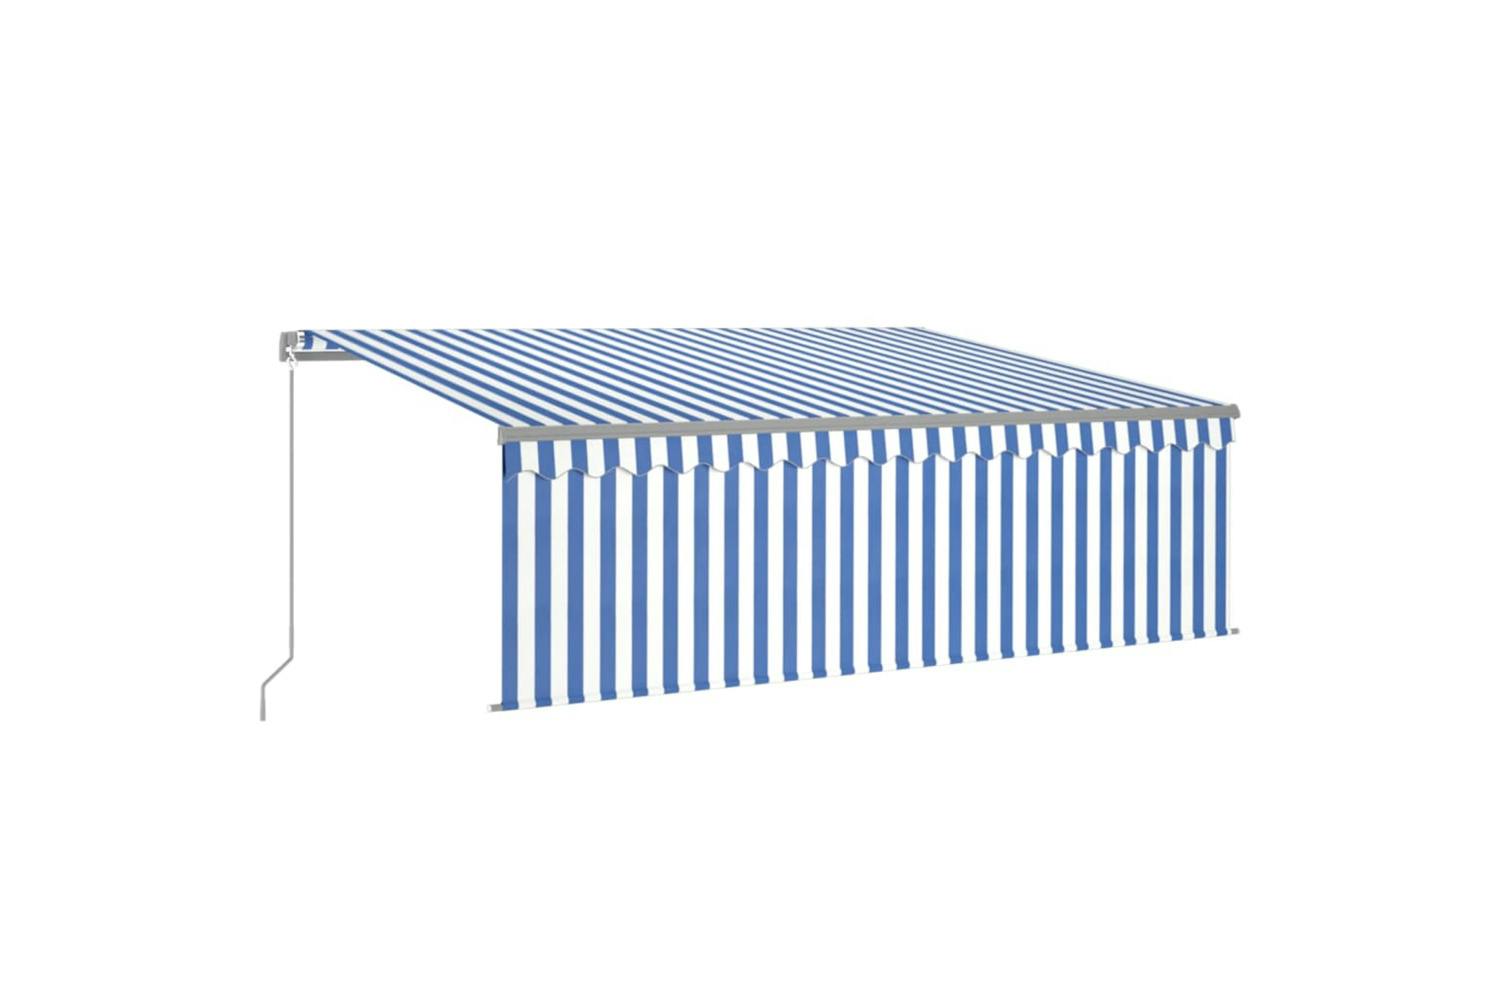 Vidaxl 3069436 Manual Retractable Awning With Blind 4.5x3m Blue&white